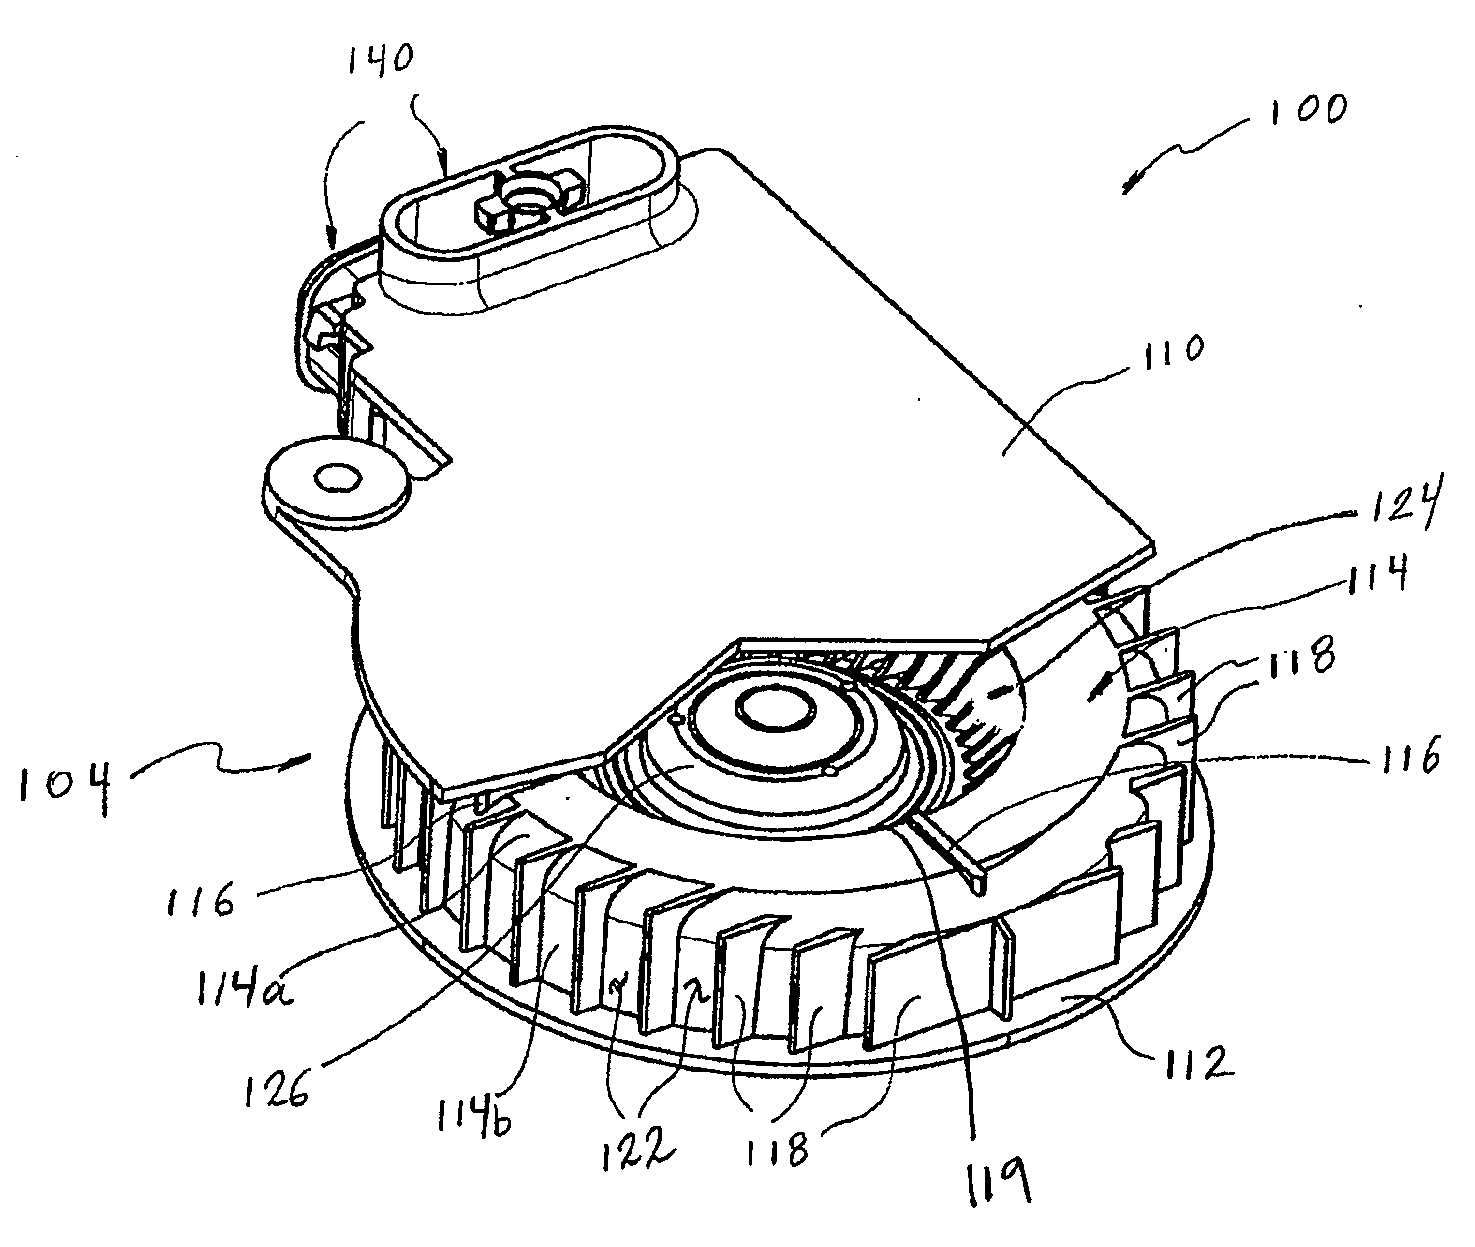 Blower housing for climate controlled systems